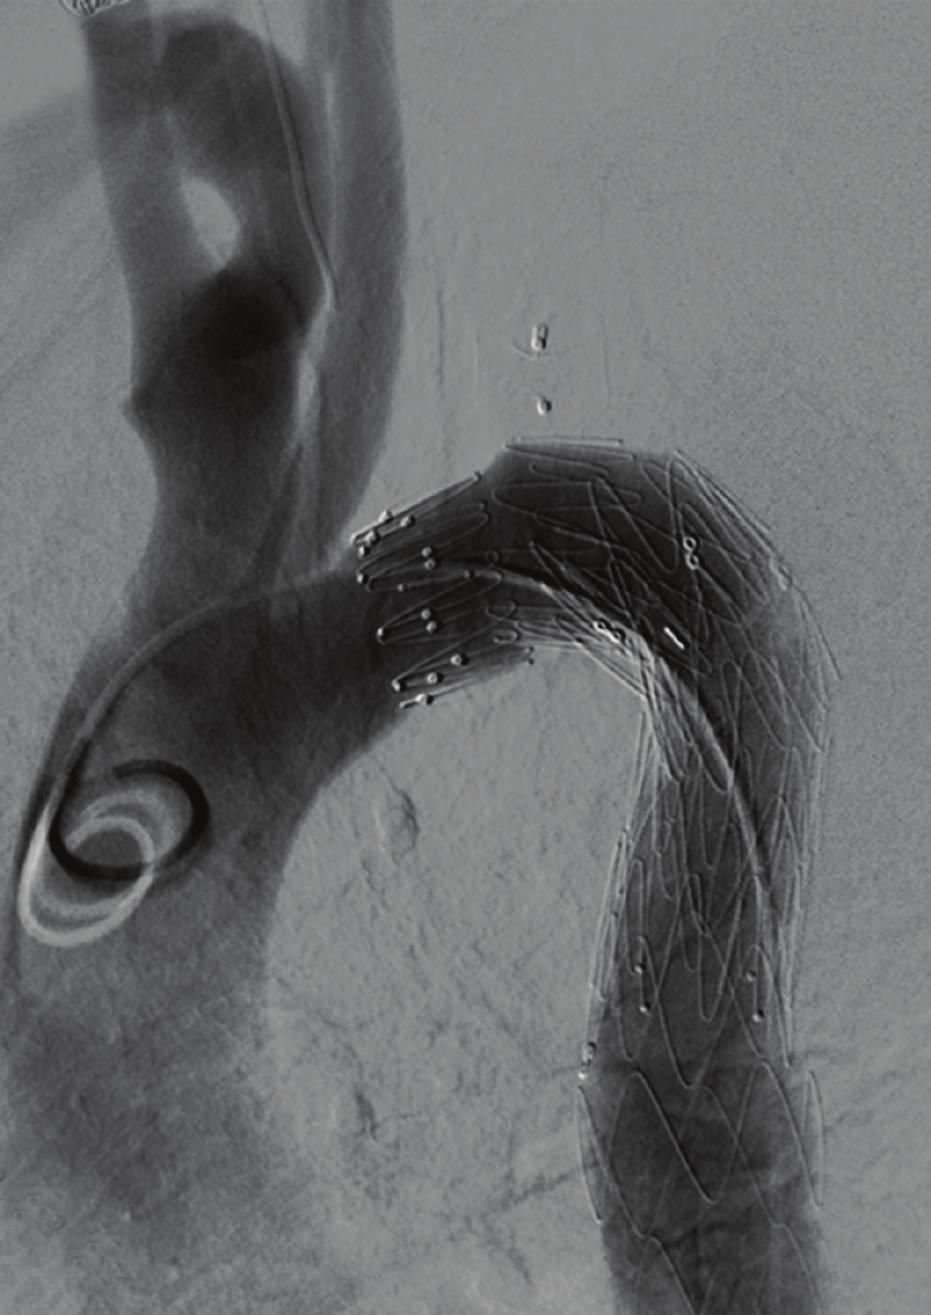 Selective angiography using a 5 Fr Sidewinder catheter shows a type I leak which can also be found on the angio-ct.